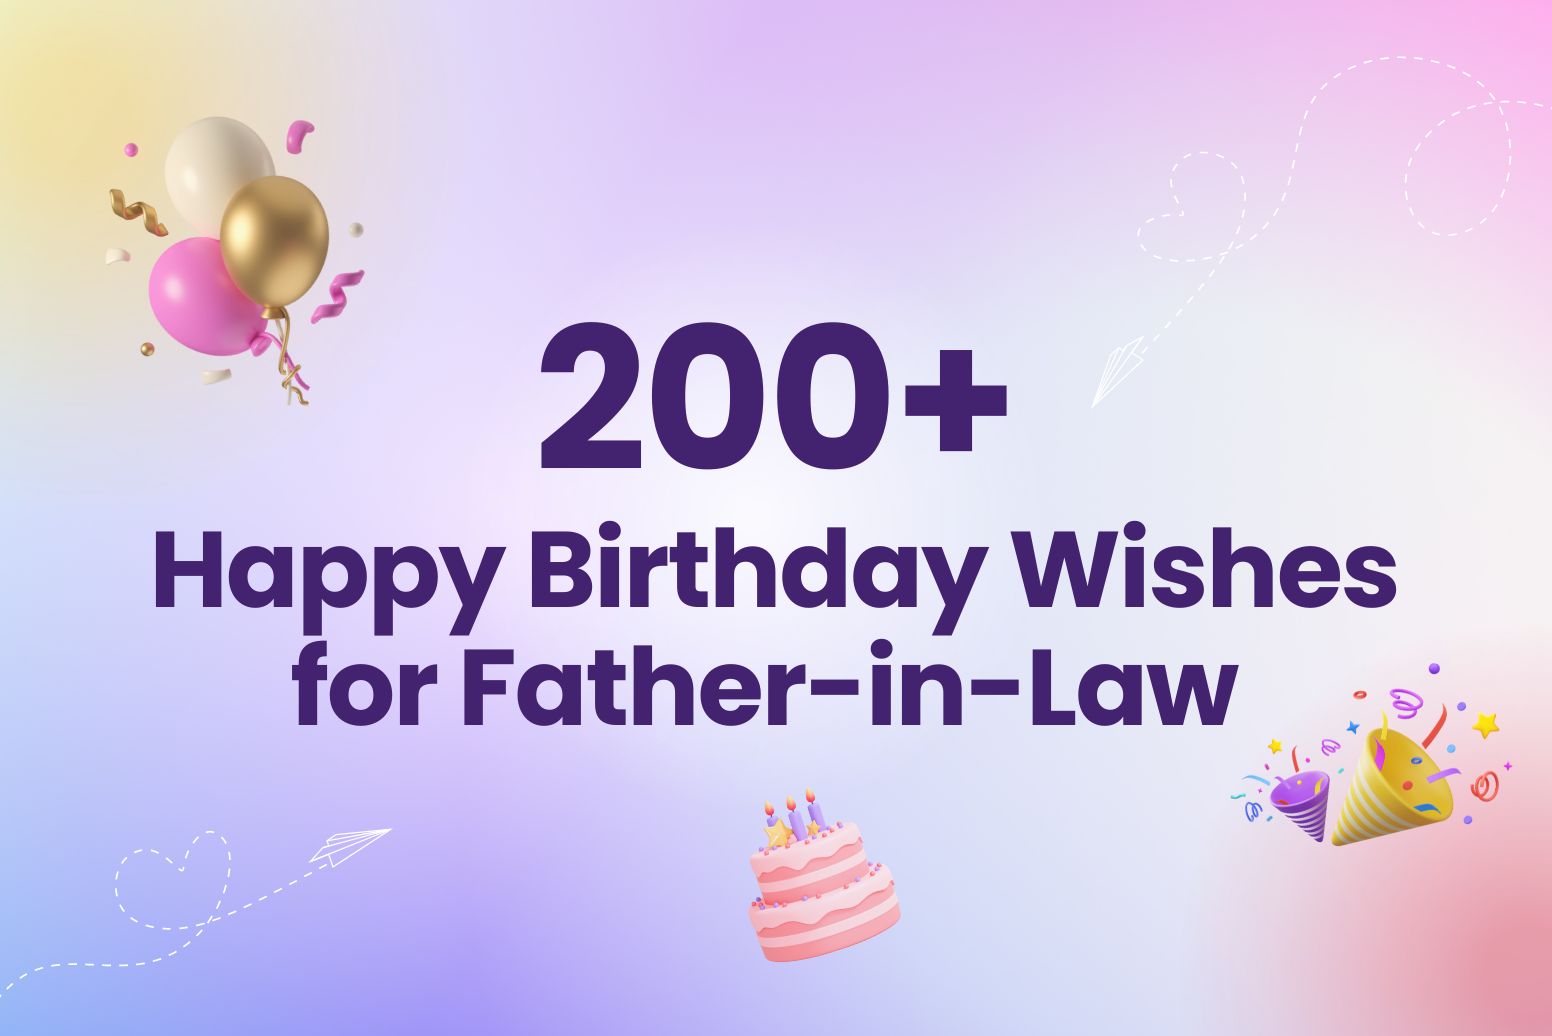 200+ Happy Birthday Wishes for Father-in-Law (Plus Quotes!)